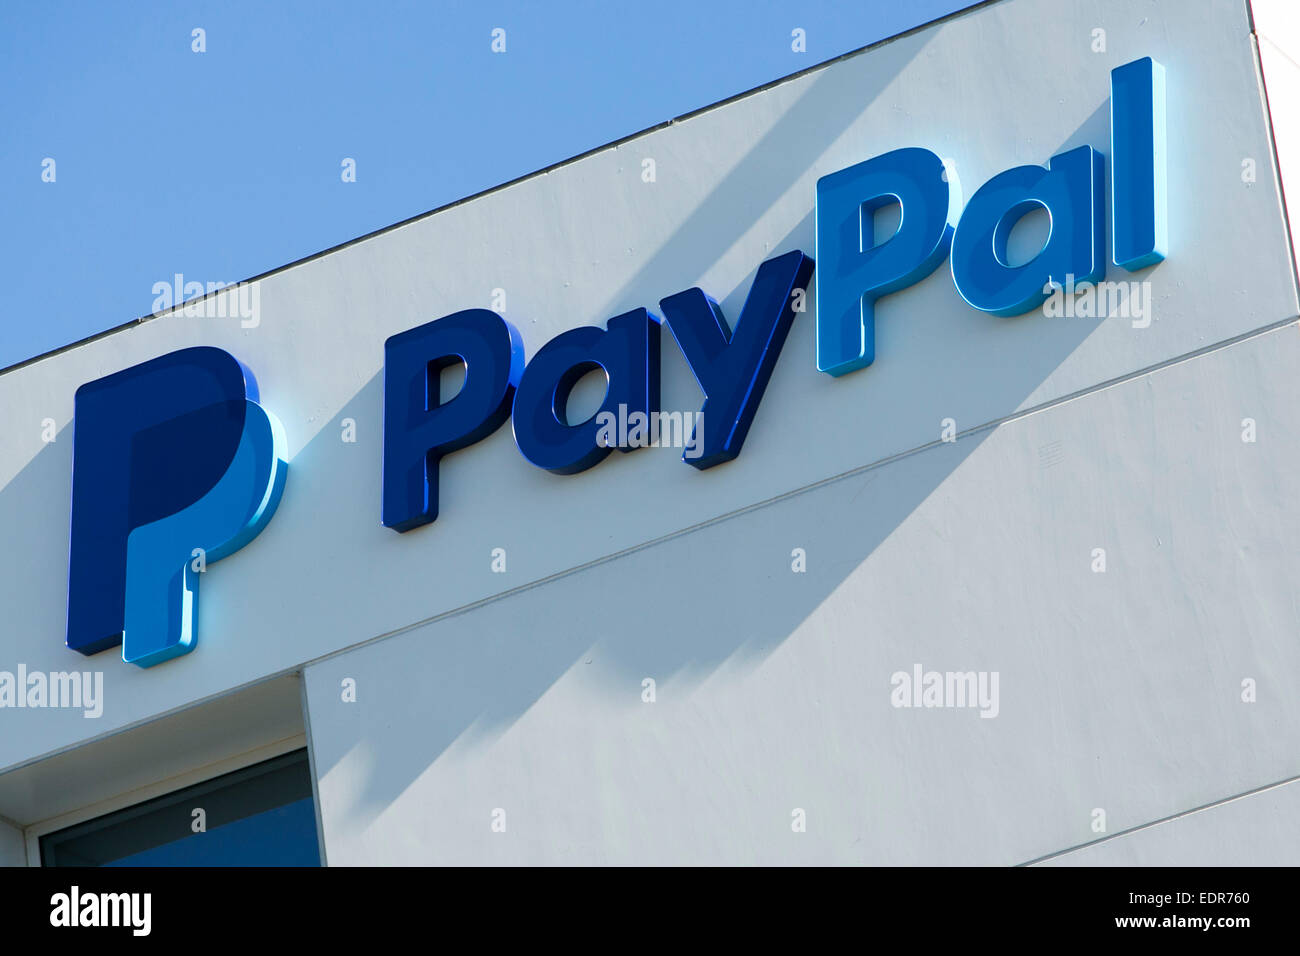 paypal here logo